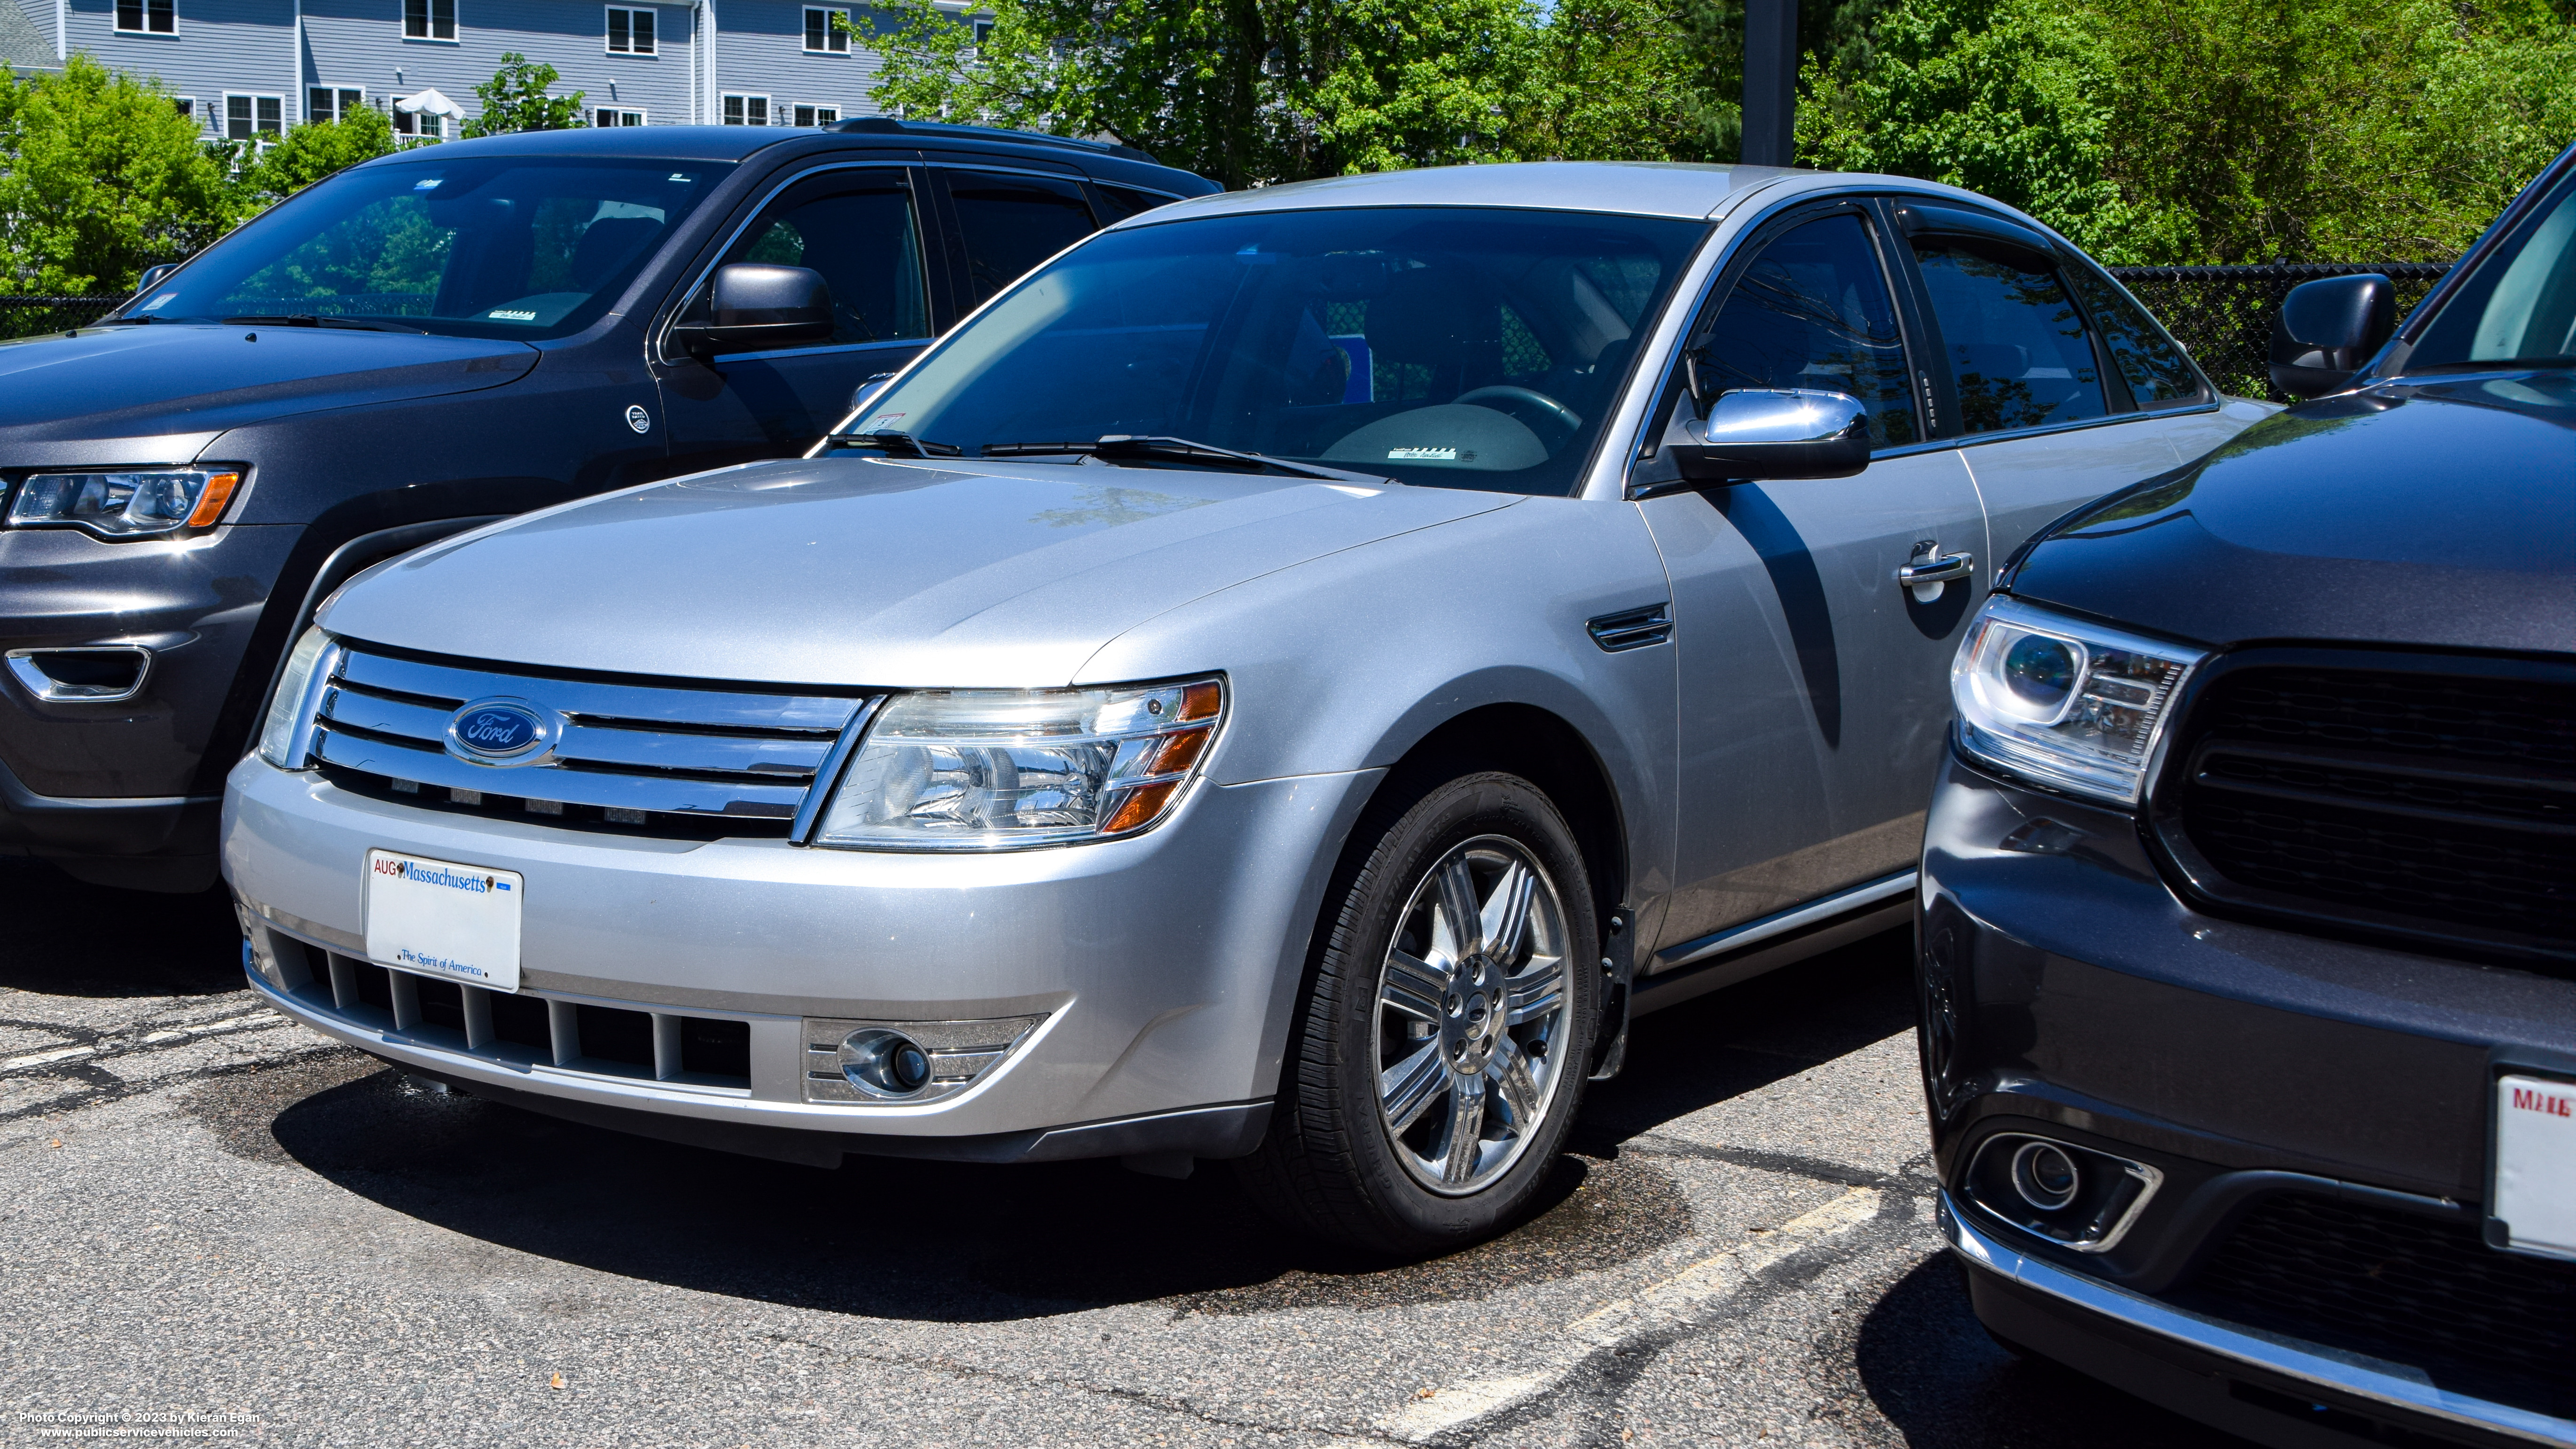 A photo  of Norwood Police
            Unmarked Unit, a 2007-2009 Ford Taurus             taken by Kieran Egan